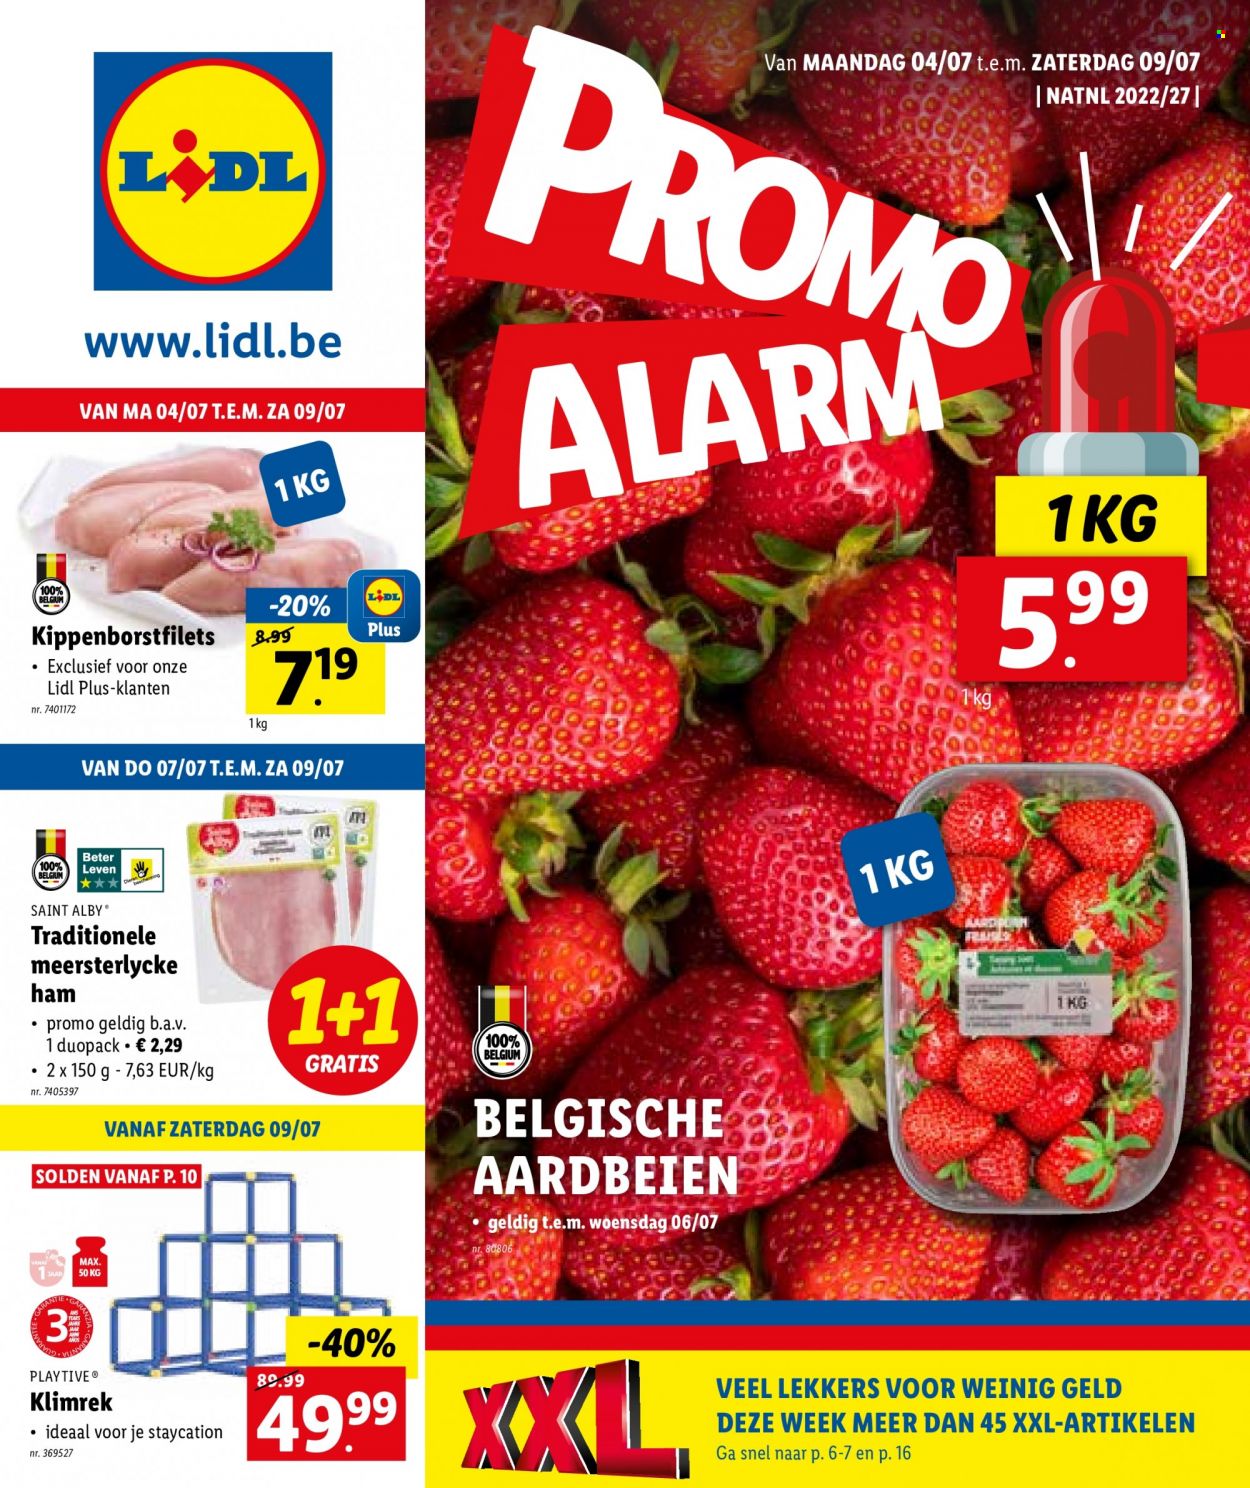 Catalogue Lidl - 4.7.2022 - 9.7.2022. Page 1.